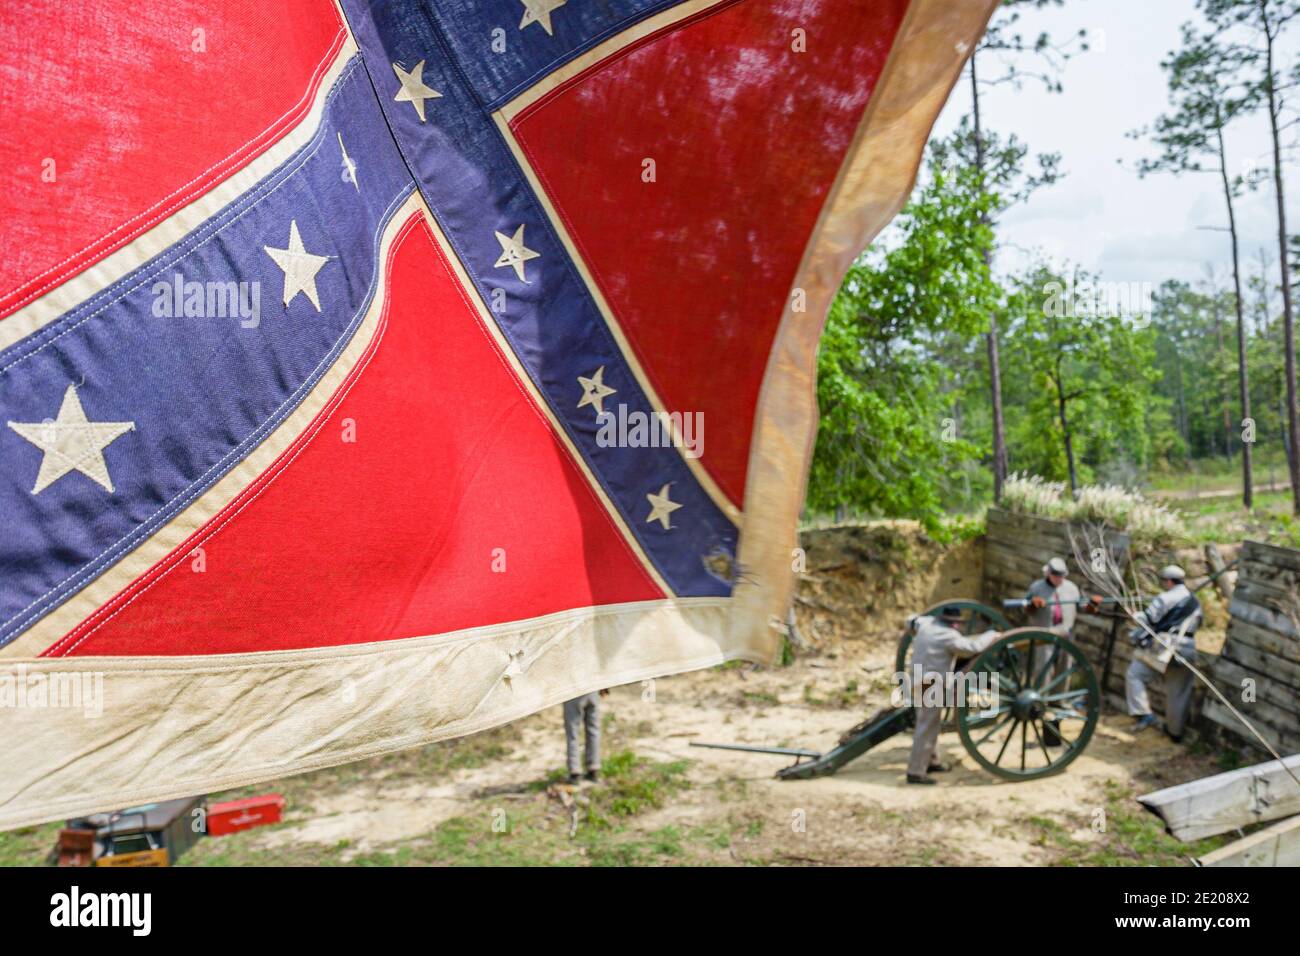 Alabama Historic Blakeley State Park Civil War reenactment,Battle of Blakeley Confederate soldiers flag cannon, Stock Photo